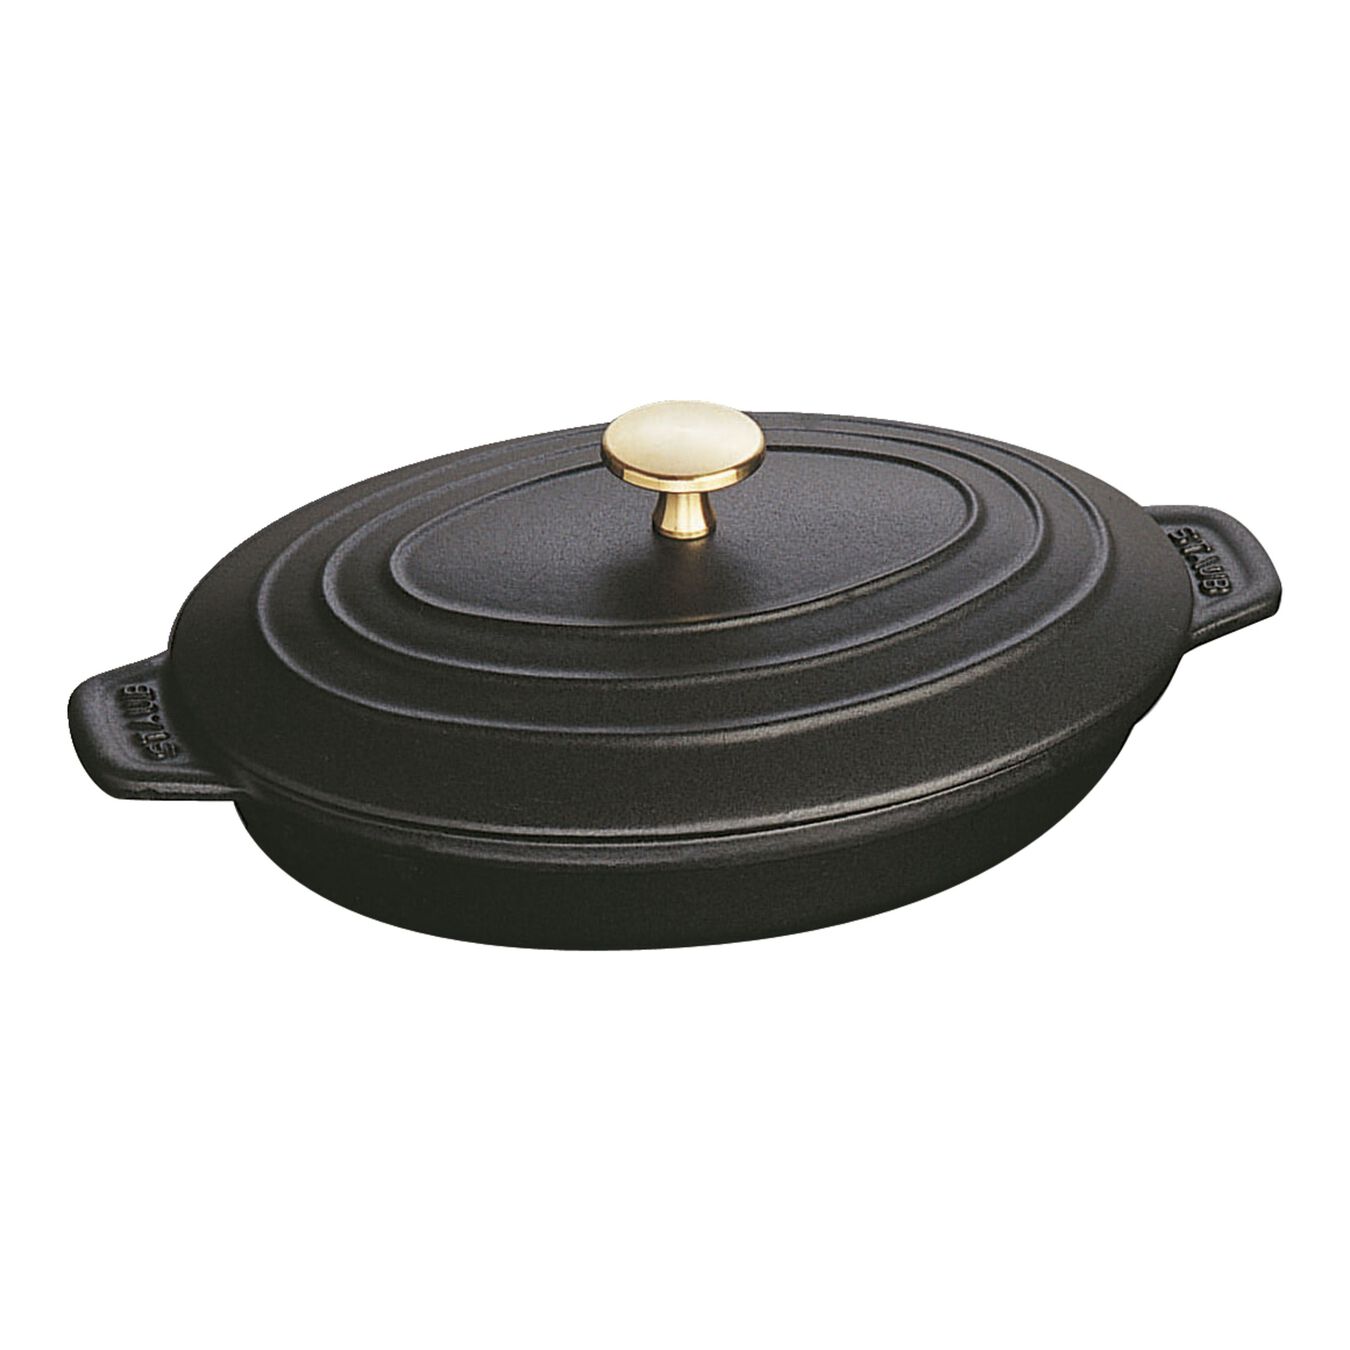  cast iron oval Oven dish with lid, black,,large 1